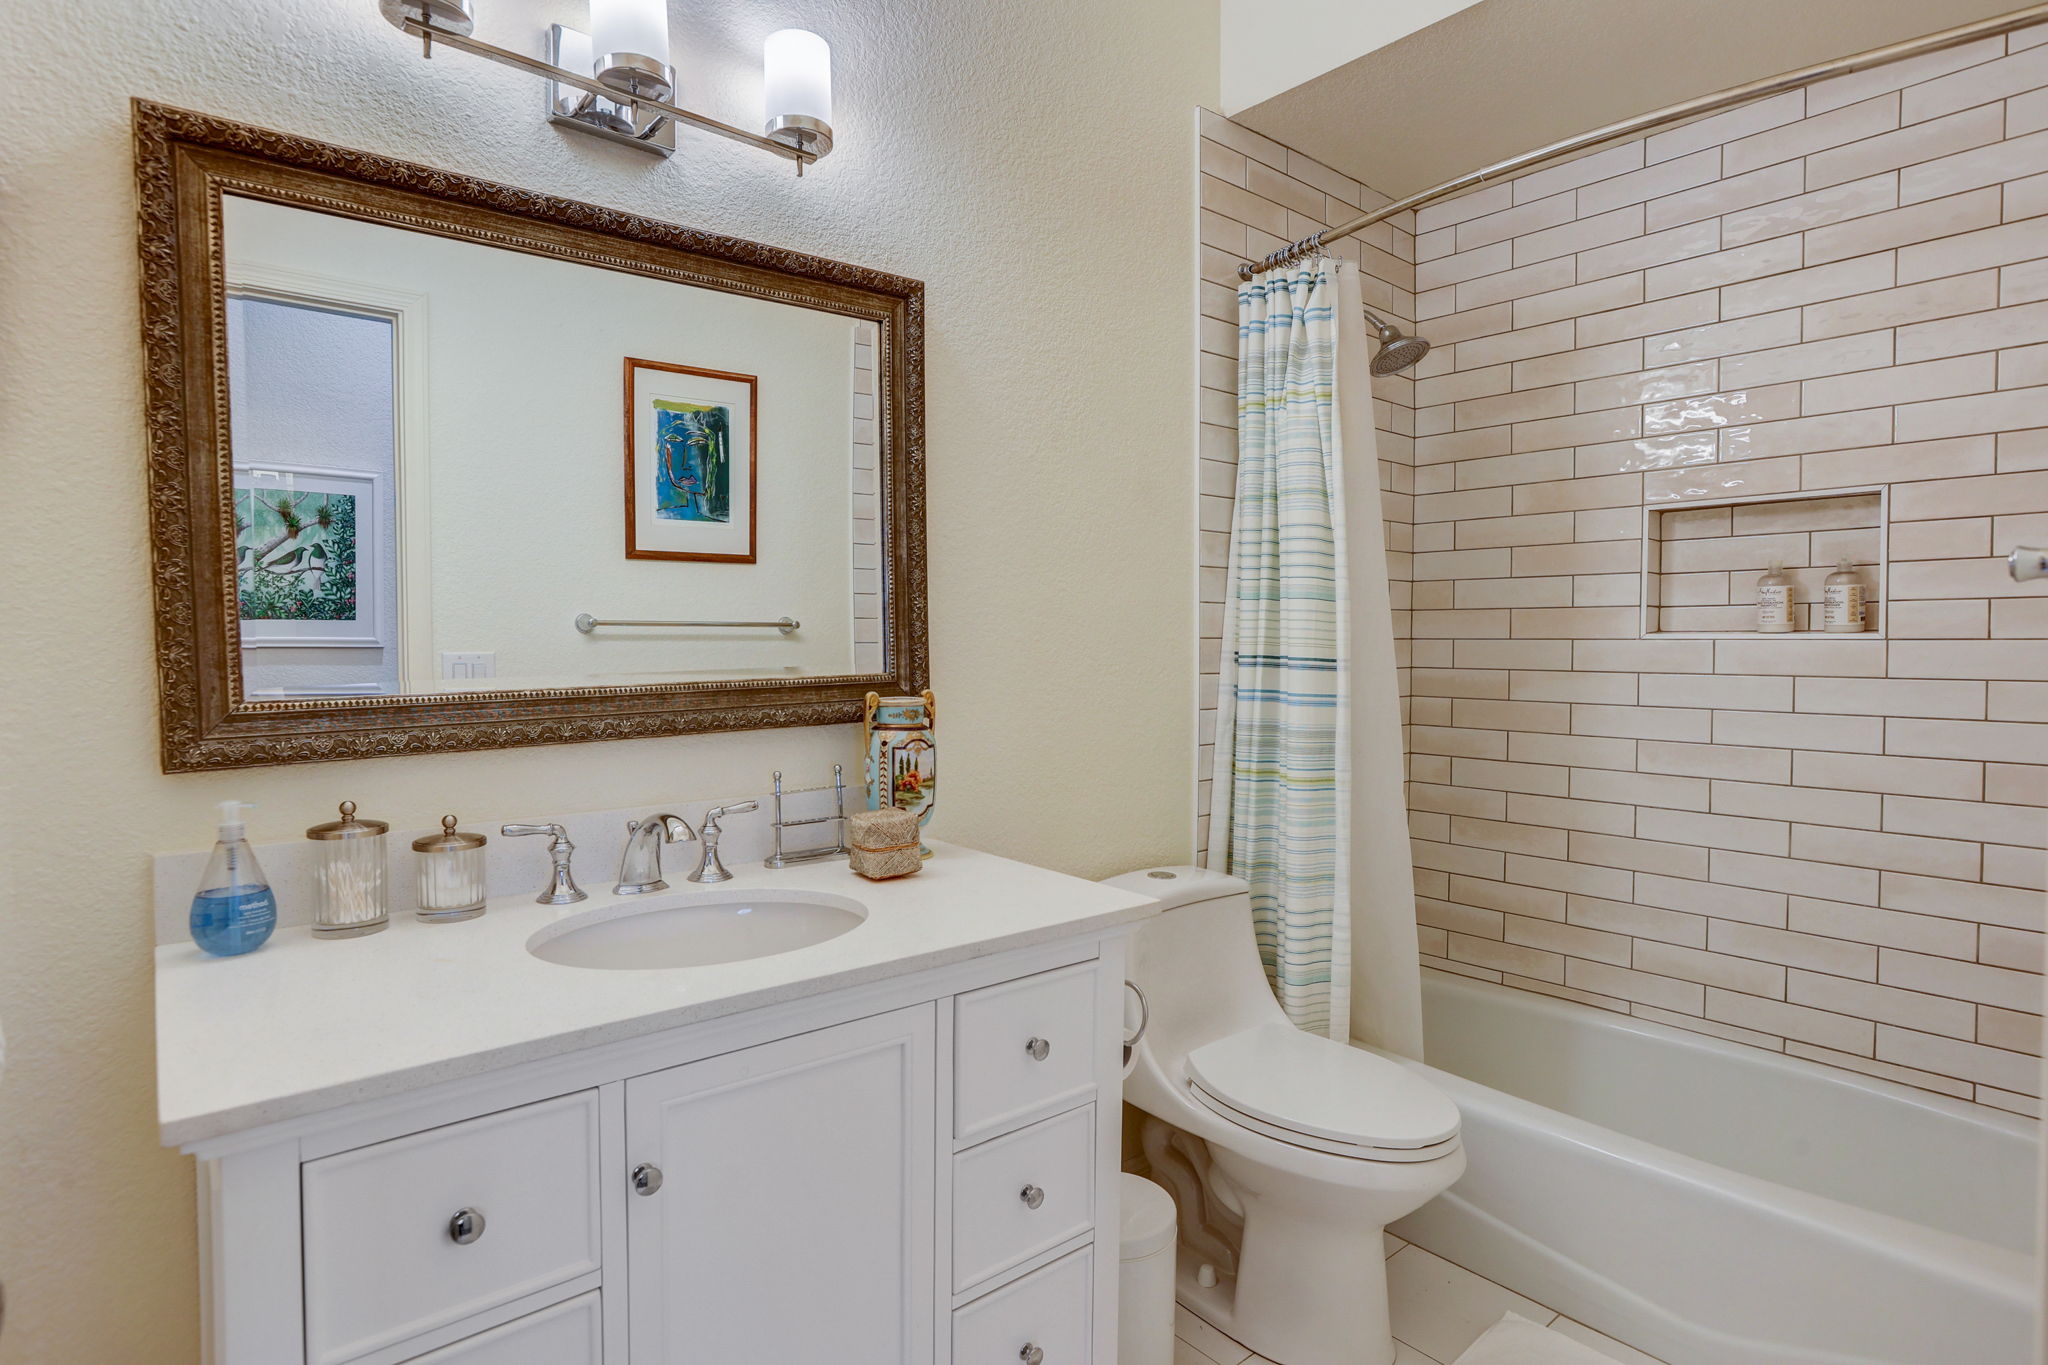 Guest bathroom fully remodeled.